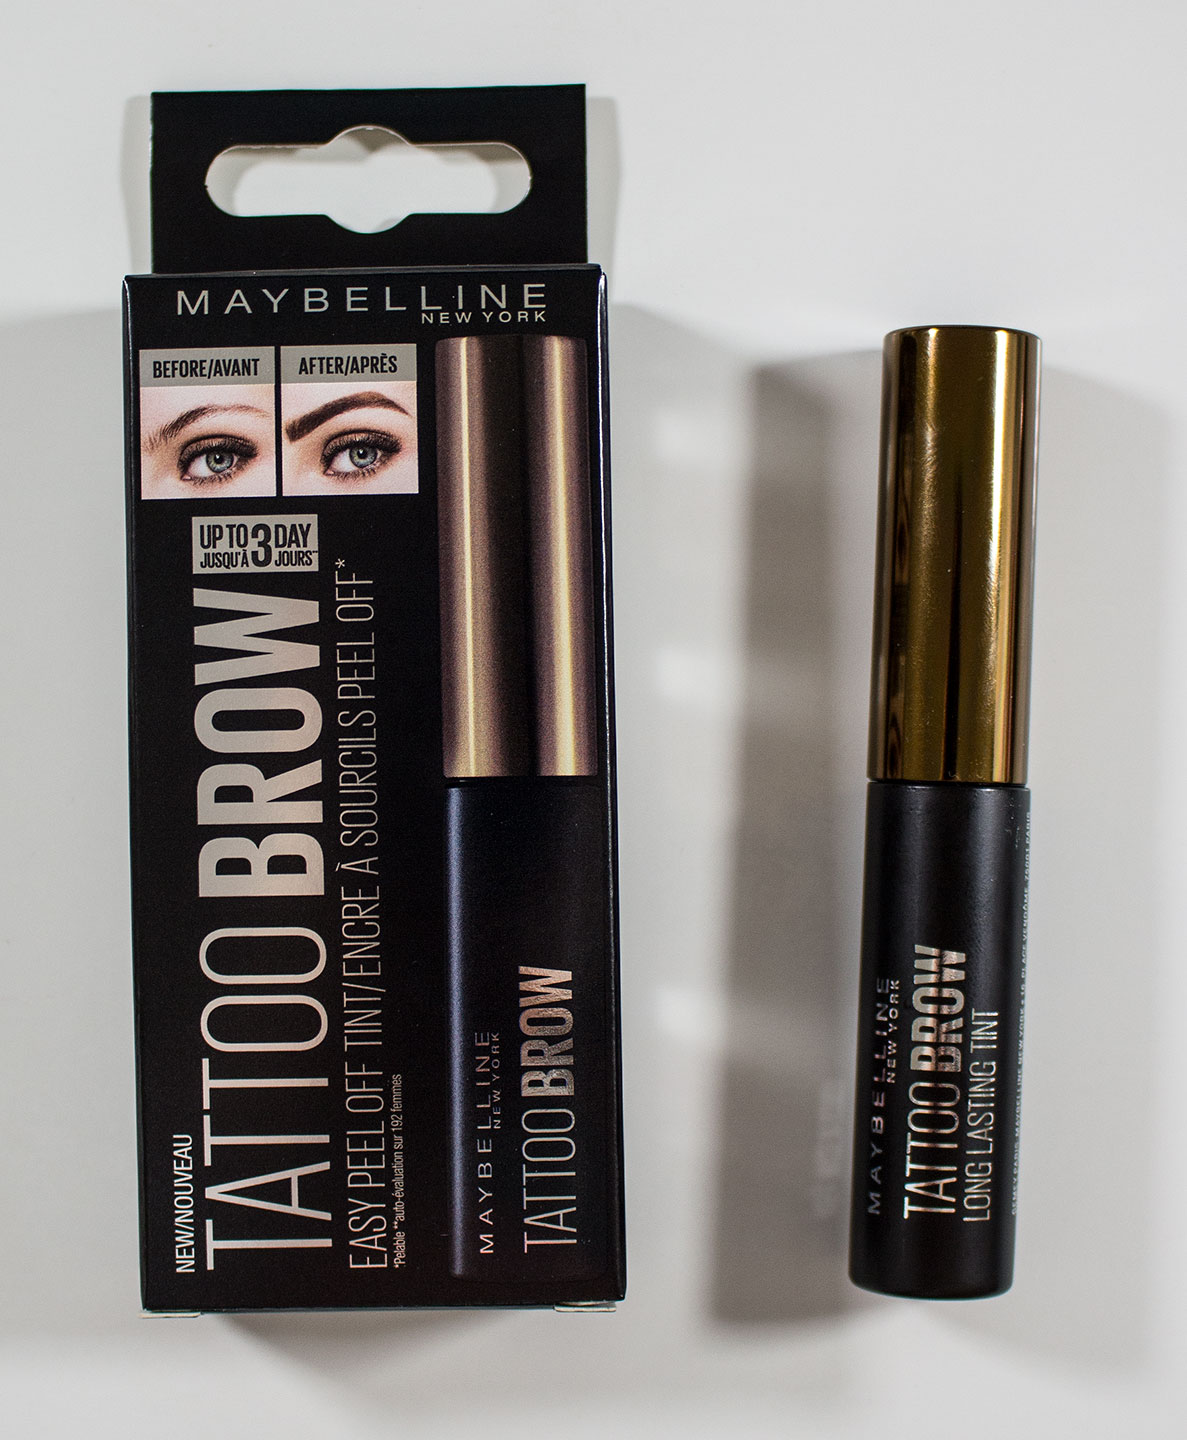 WARPAINT and Unicorns: Maybelline Tattoo Brow 3 Day Gel-Tint in Soft ...